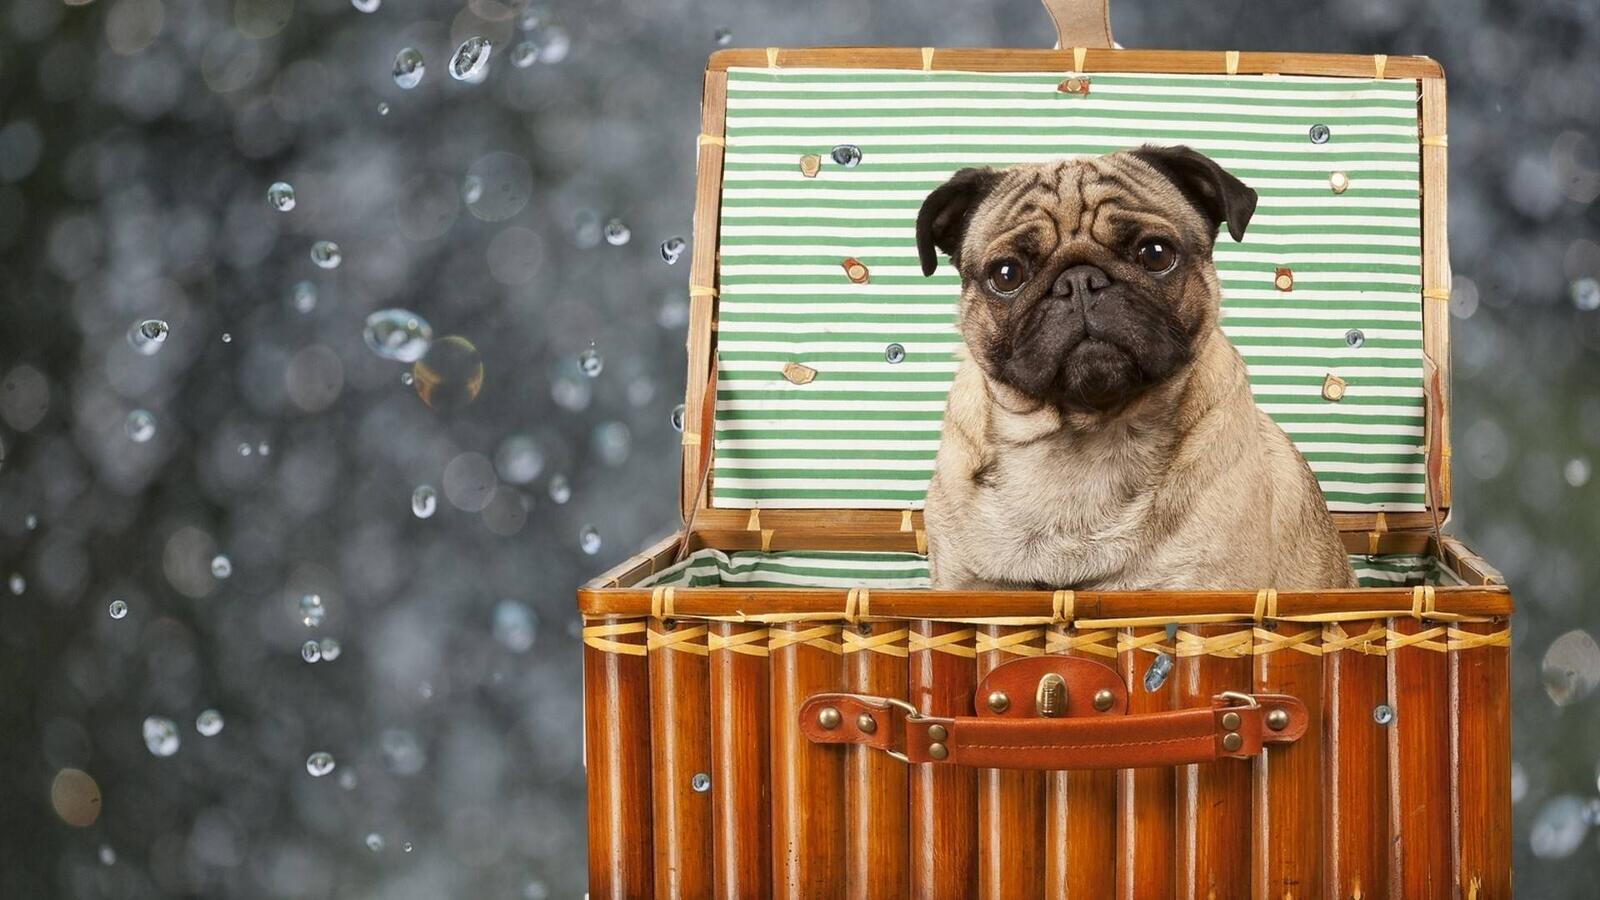 Wallpapers pug in the box photo dogs on the desktop